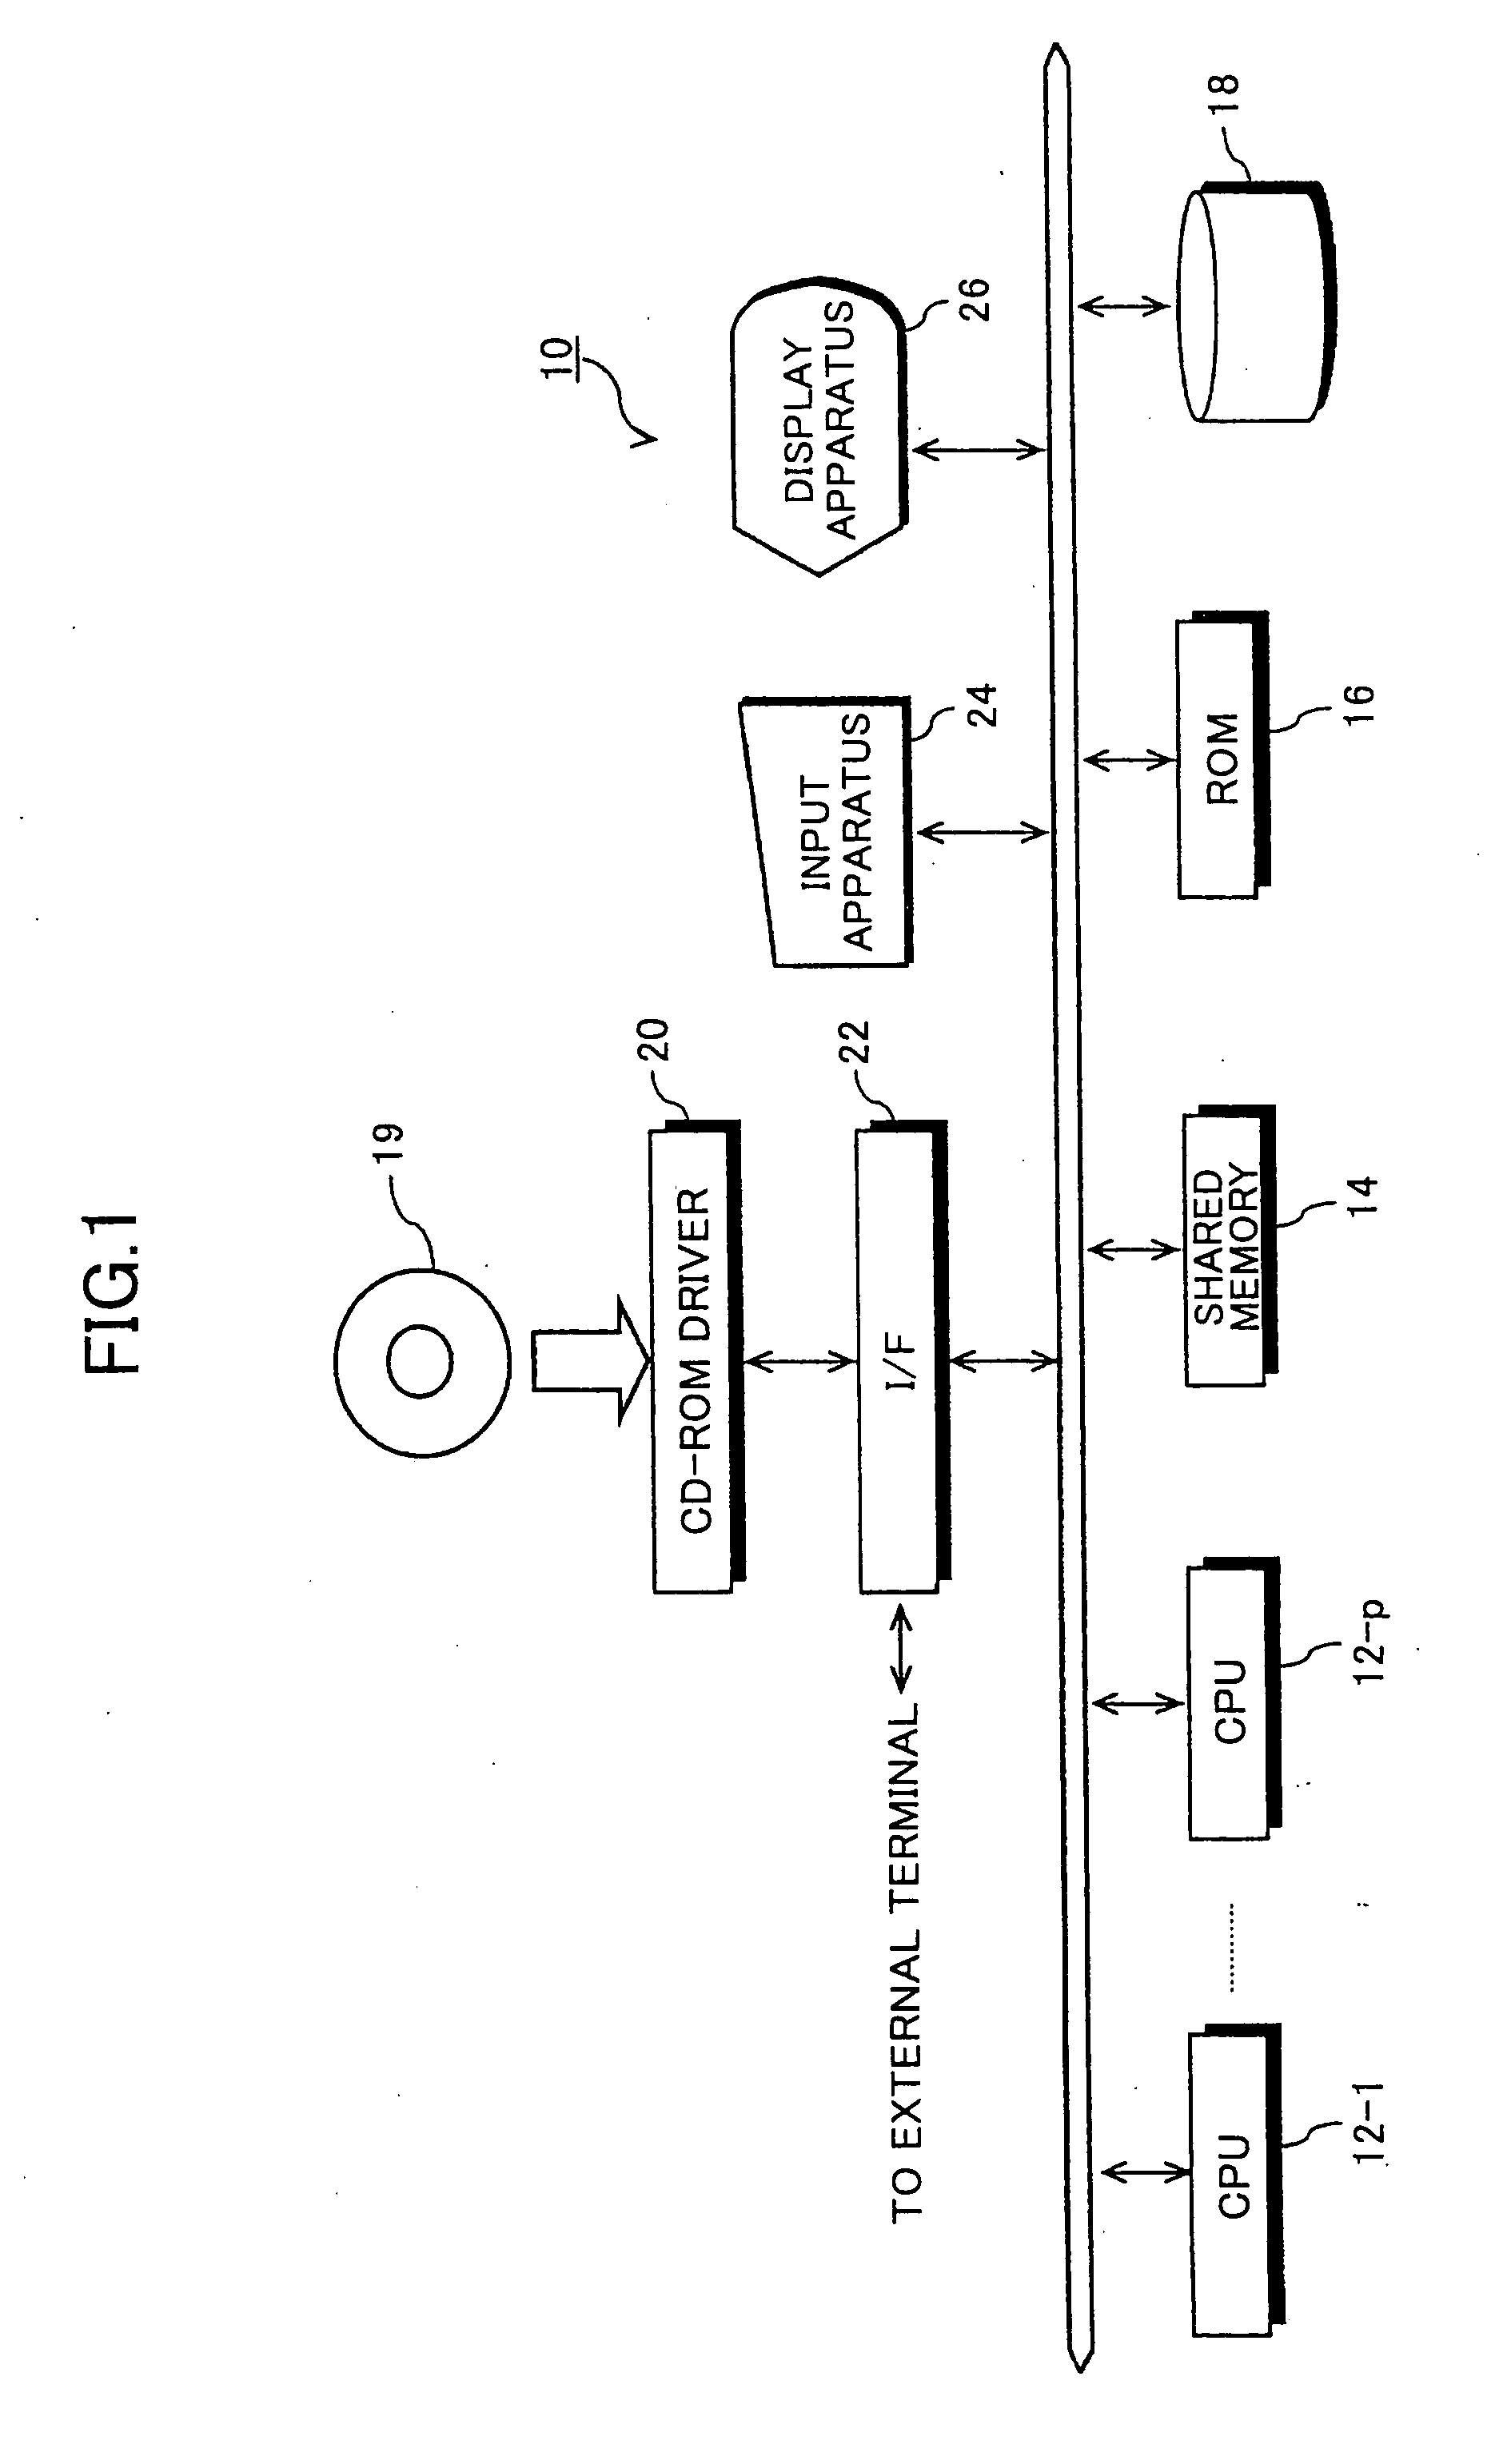 Shared-Memory Multiprocessor System and Method for Processing Information